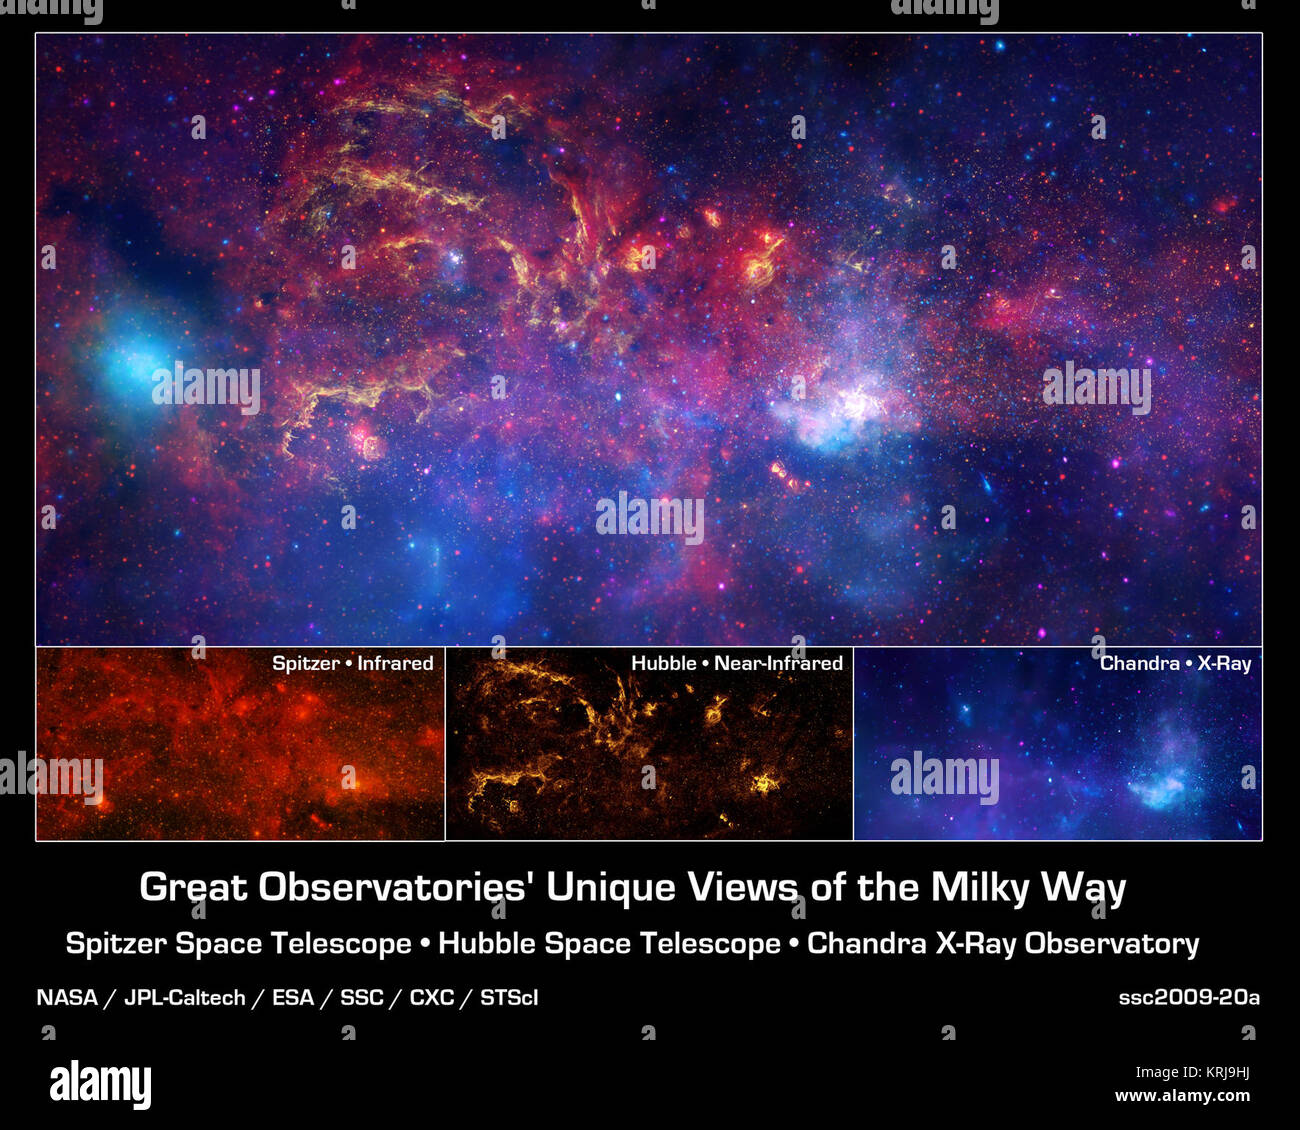 In celebration of the International Year of Astronomy 2009, NASA's Great Observatories -- the Hubble Space Telescope, the Spitzer Space Telescope, and the Chandra X-ray Observatory -- have produced a matched trio of images of the central region of our Milky Way galaxy. Each image shows the telescope's different wavelength view of the galactic center region, illustrating the unique science each observatory conducts.   Bottom Left - Spitzer's infrared-light observations provide a detailed and spectacular view of the galactic center region. The swirling core of our galaxy harbors hundreds of thou Stock Photo